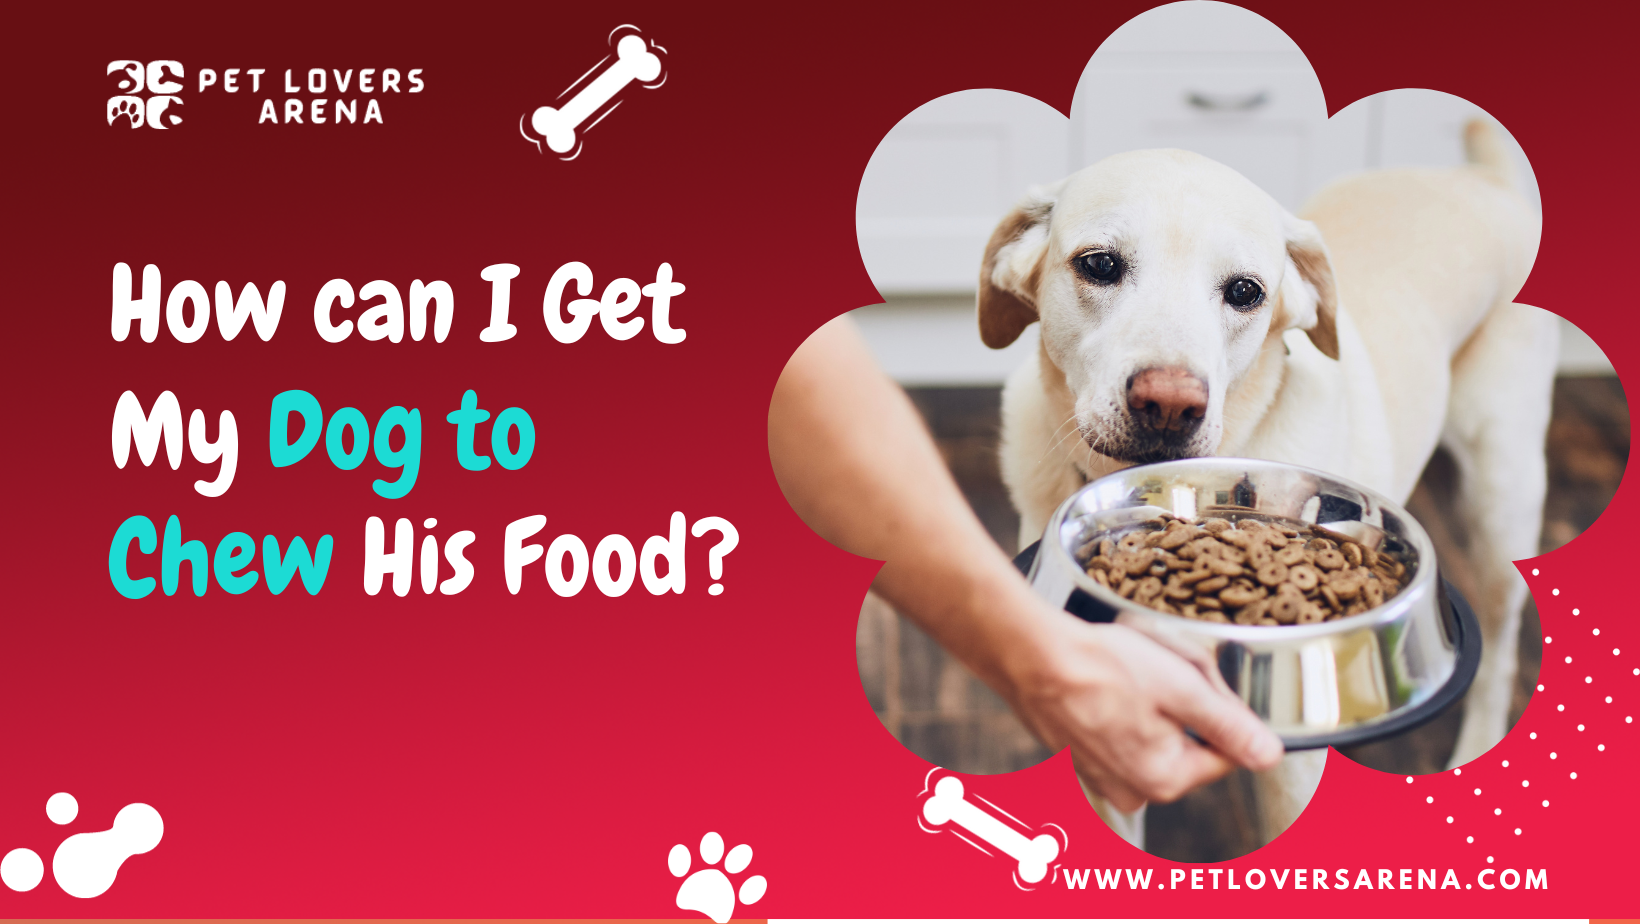 How can I Get My Dog to Chew His Food?